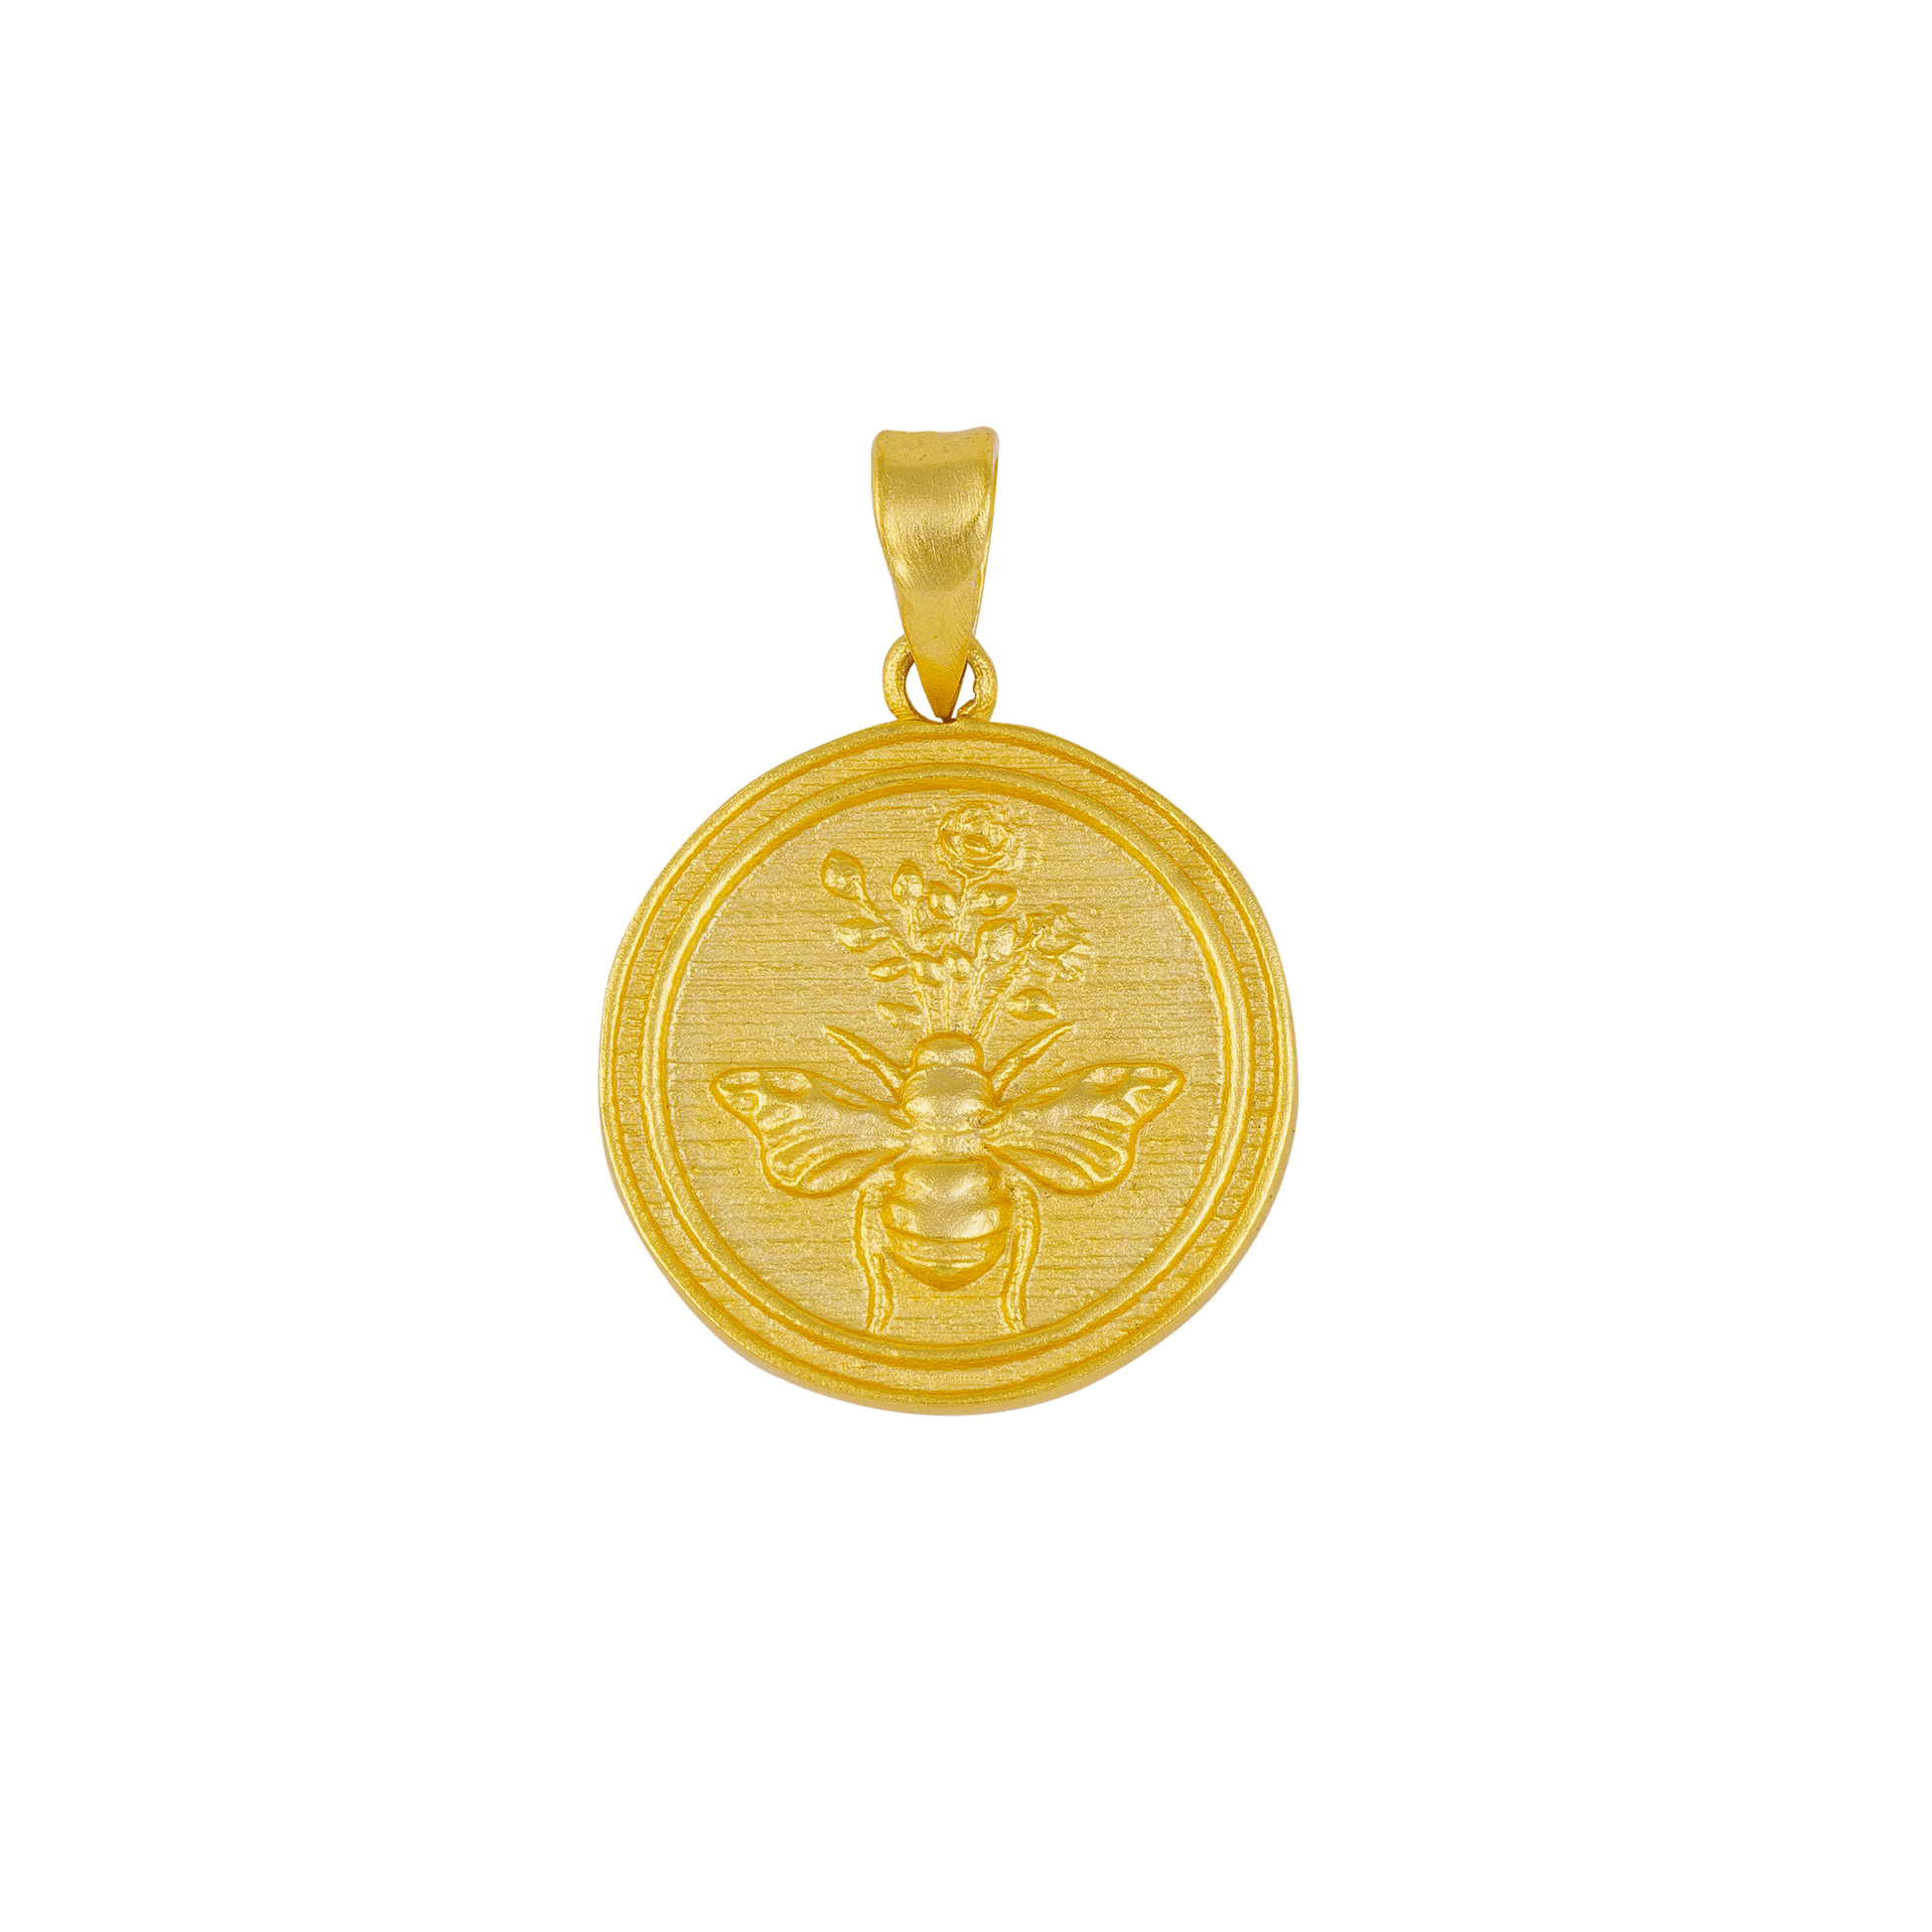 Power of Belief Coin Necklace - Wisdom and Romance